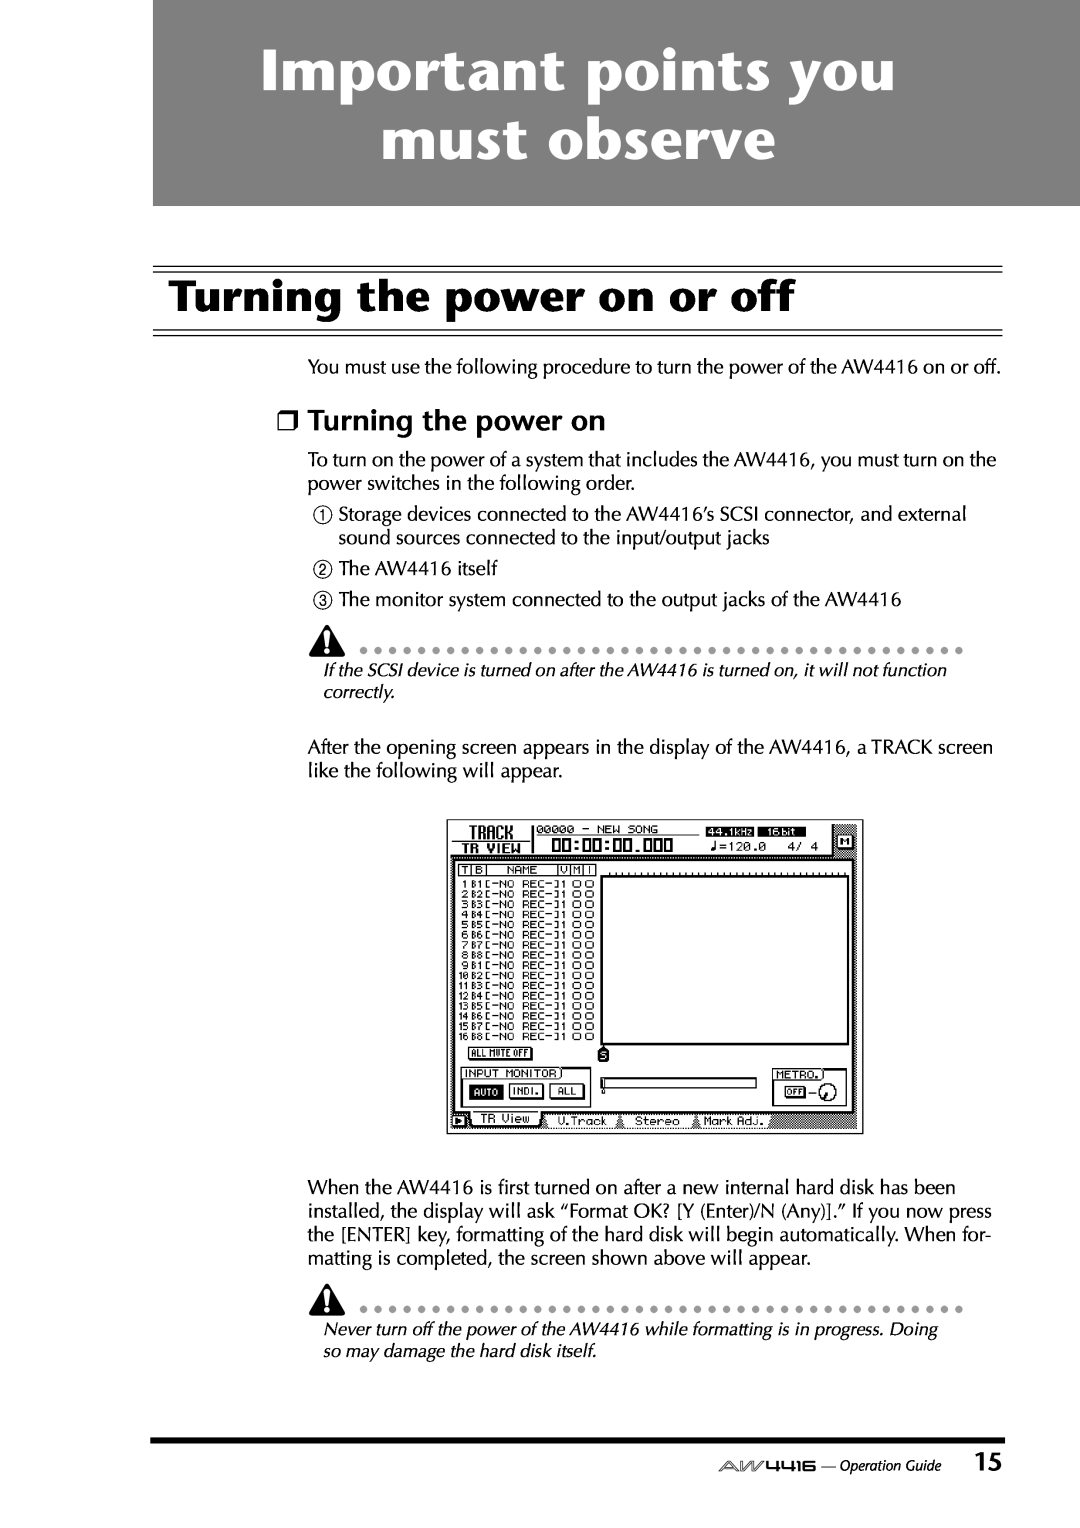 Yamaha AW4416 manual Important points you must observe, Turning the power on or off 